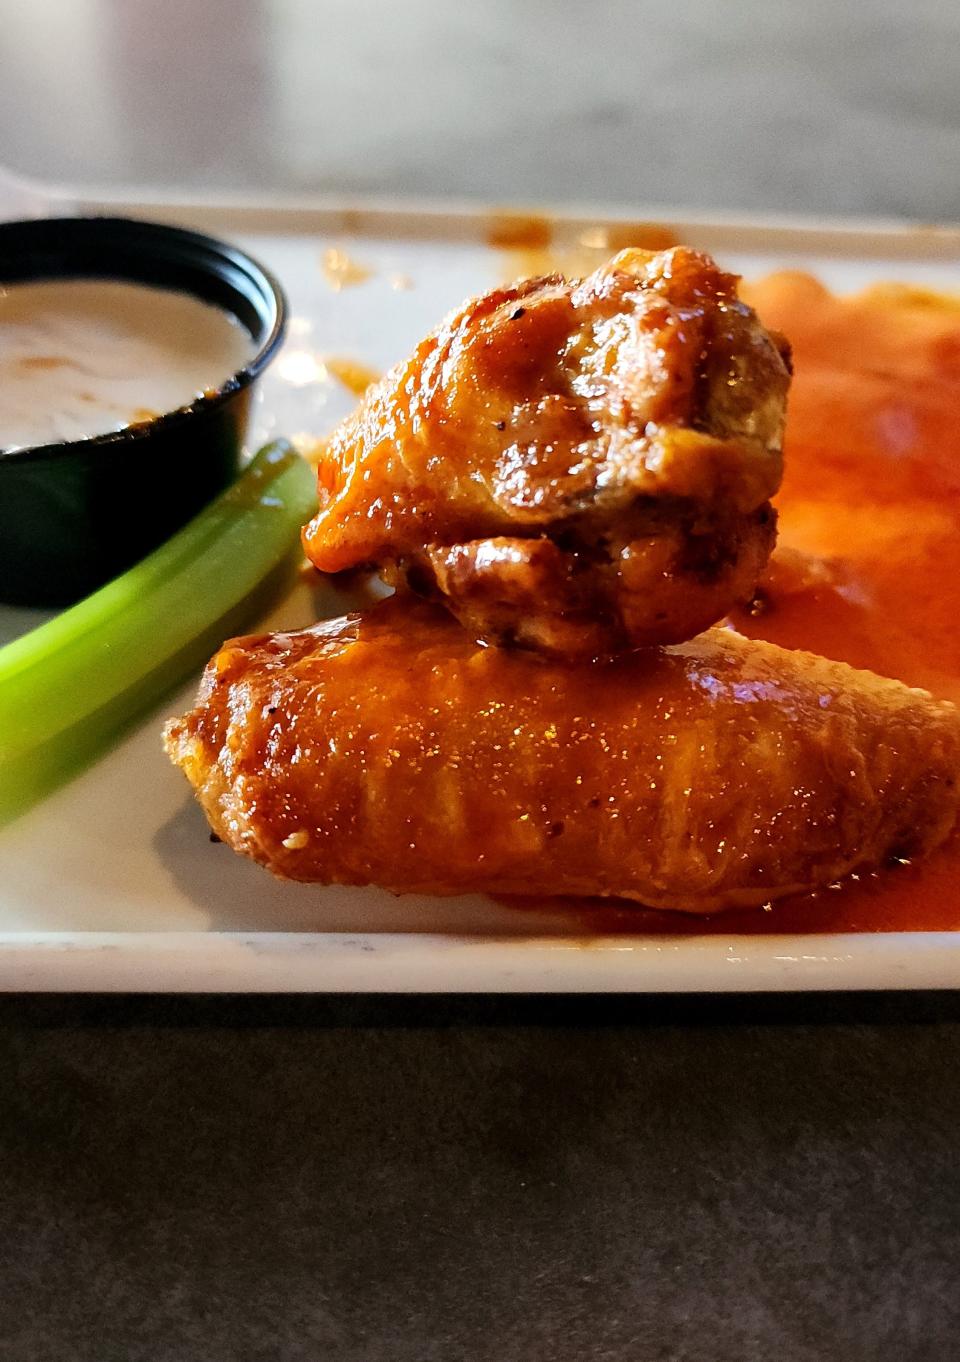 Like any comfort food restaurant, chicken wings are on the menu.